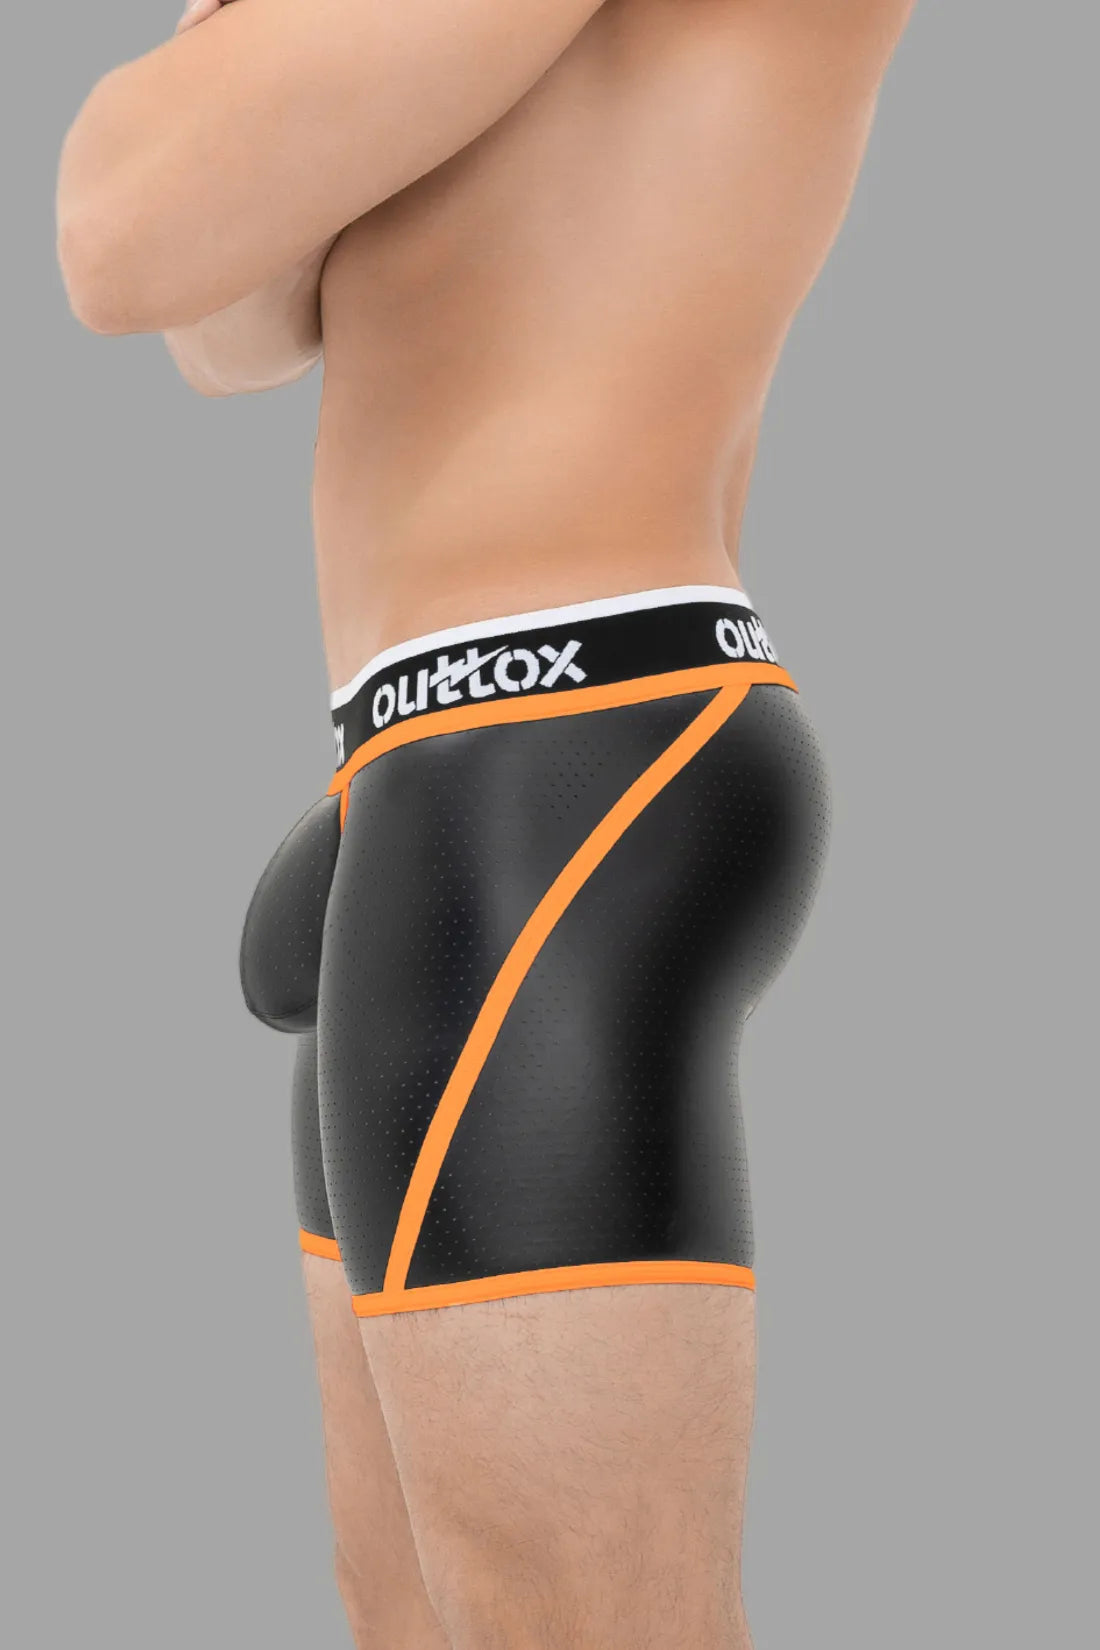 Outtox. Wrap-Rear Short Tights. Snap Codpiece. Black and Orange